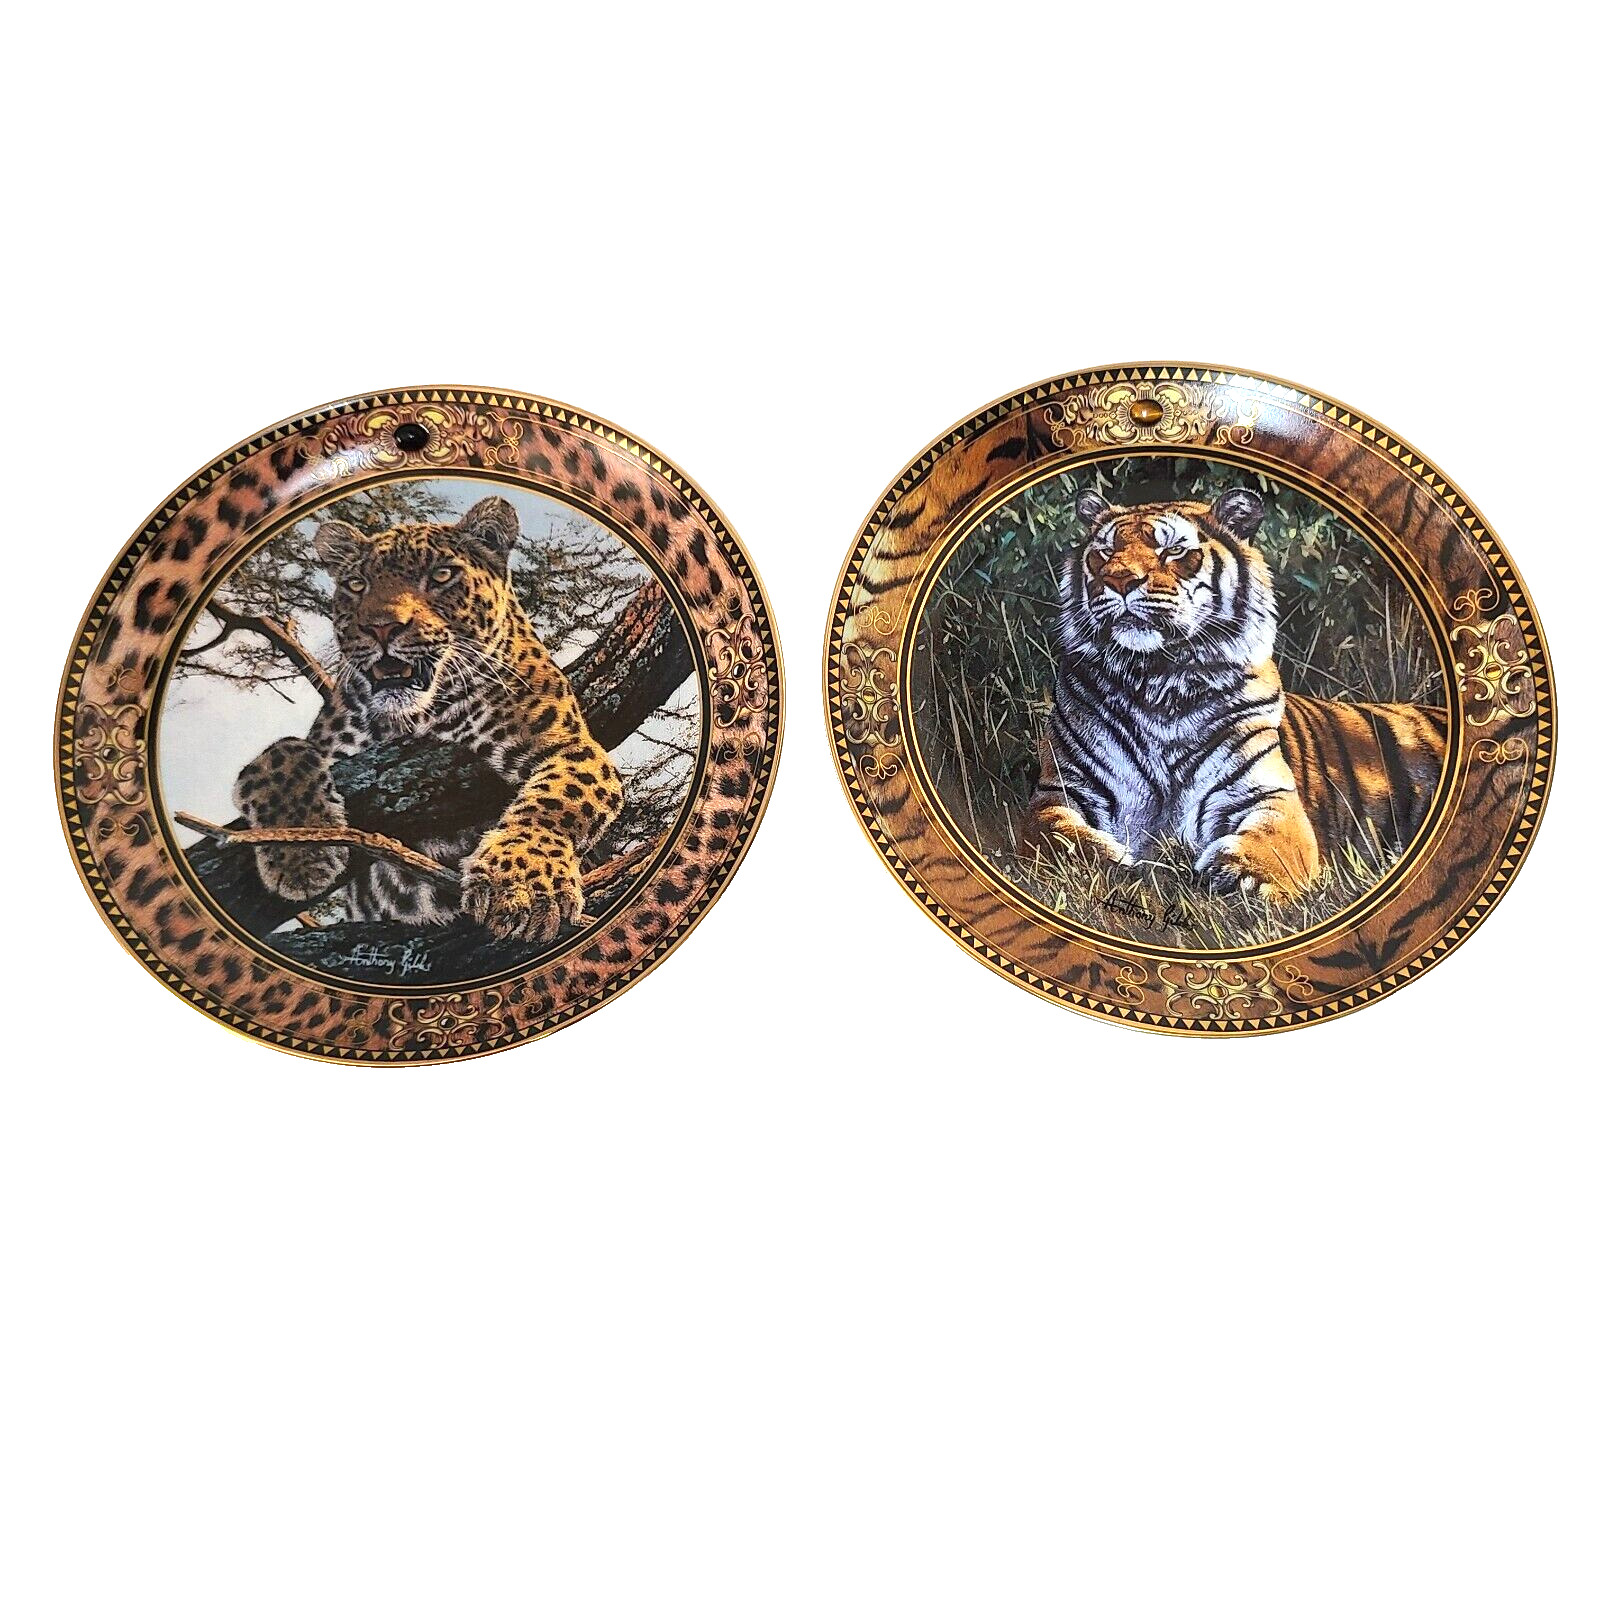 Franklin Mint plates Lot of 2, Lure Of The Leopard, Treasure of the Tiger